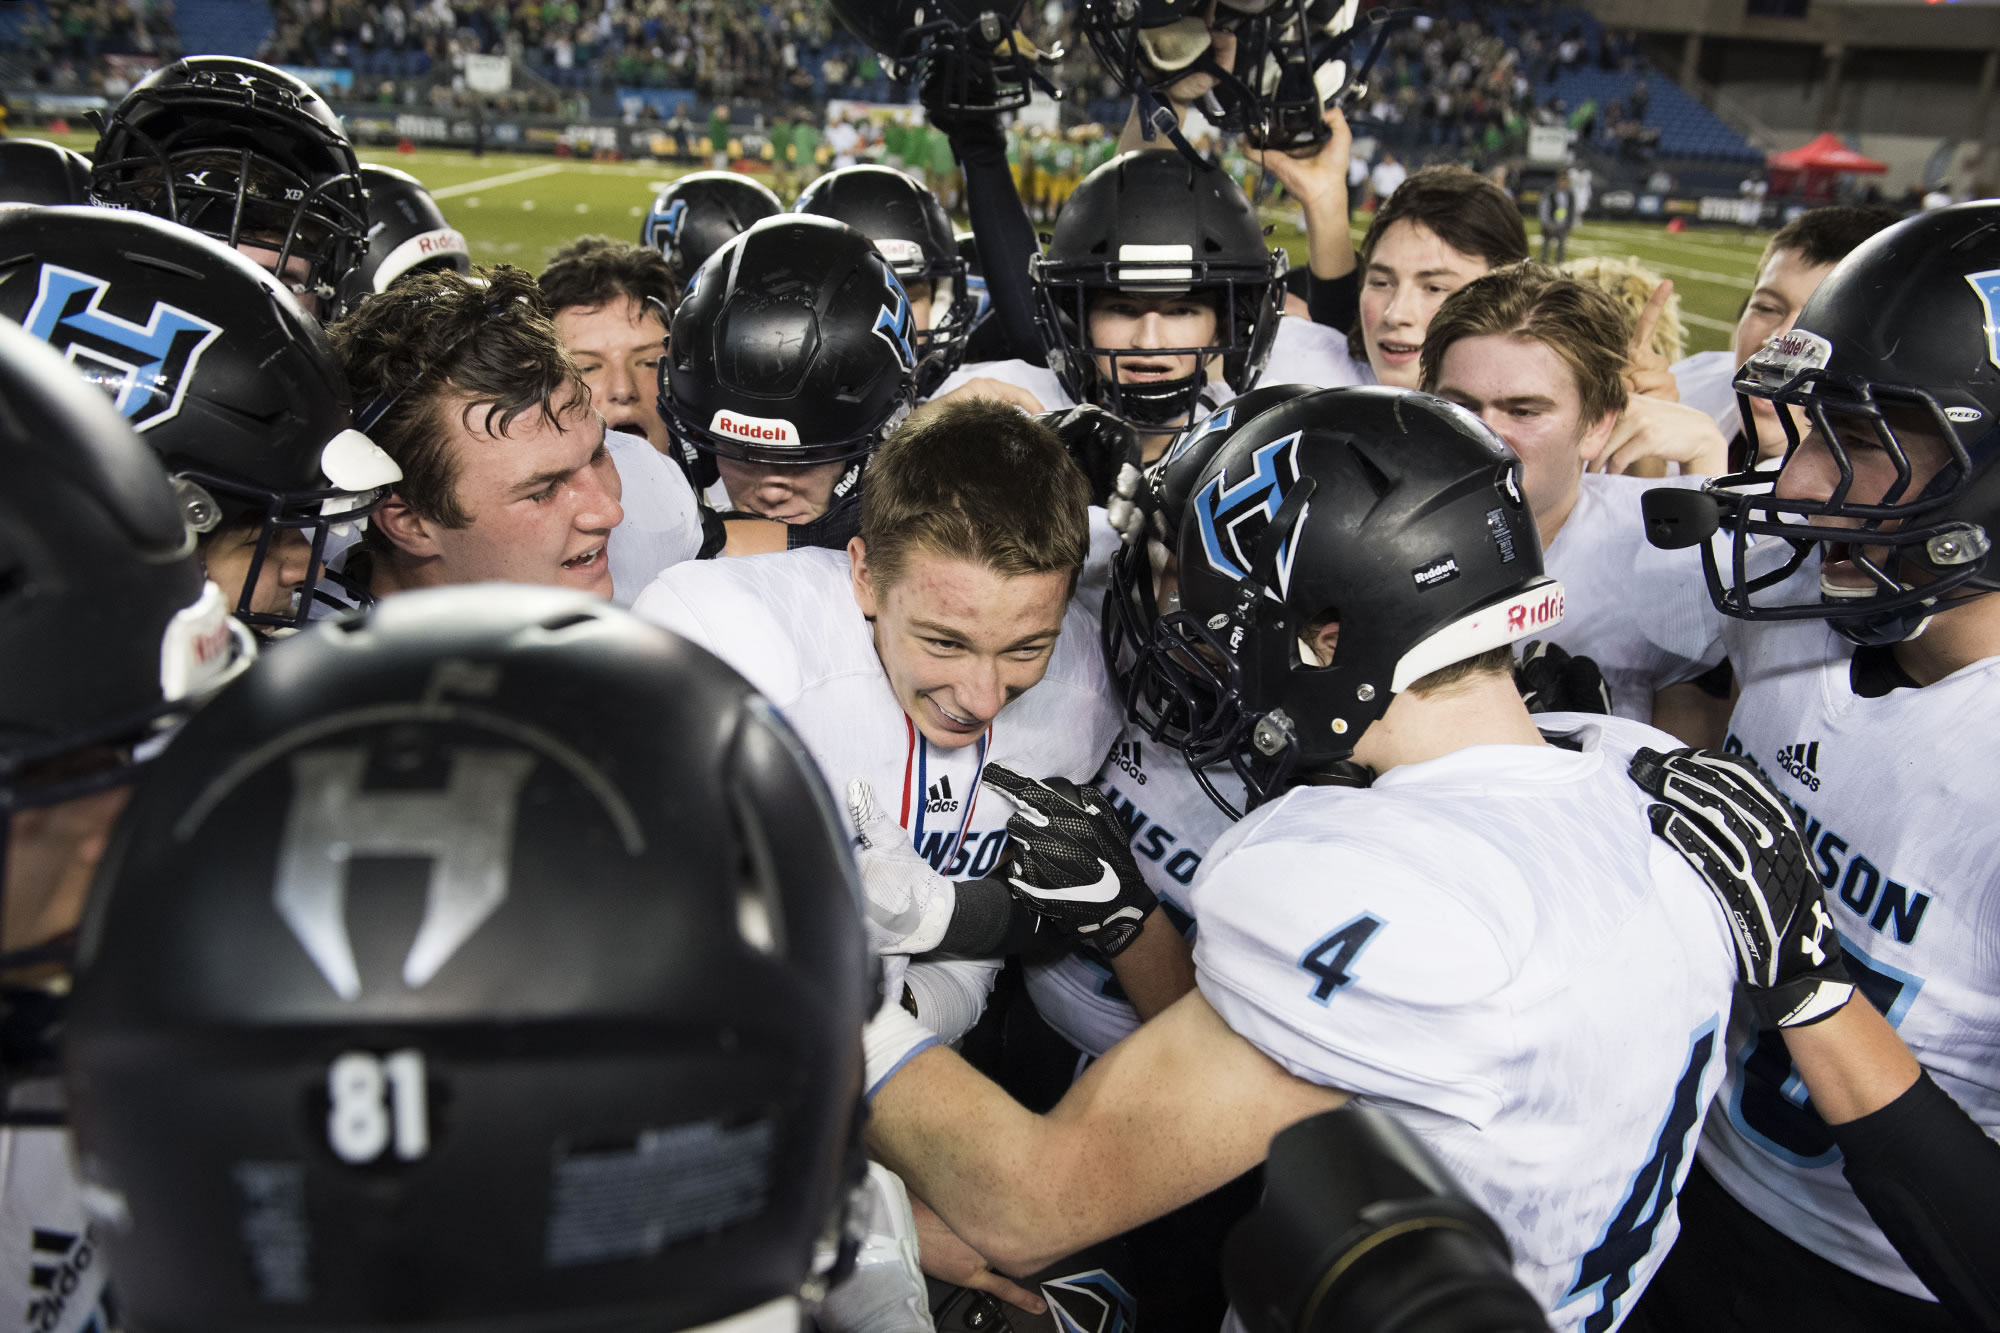 Hockinson surrounds quarterback Canon Racanelli as they celebrate their win against Tumwater after the 2A state football championship game Saturday, Dec. 2, 2017, in Tacoma, Wash.